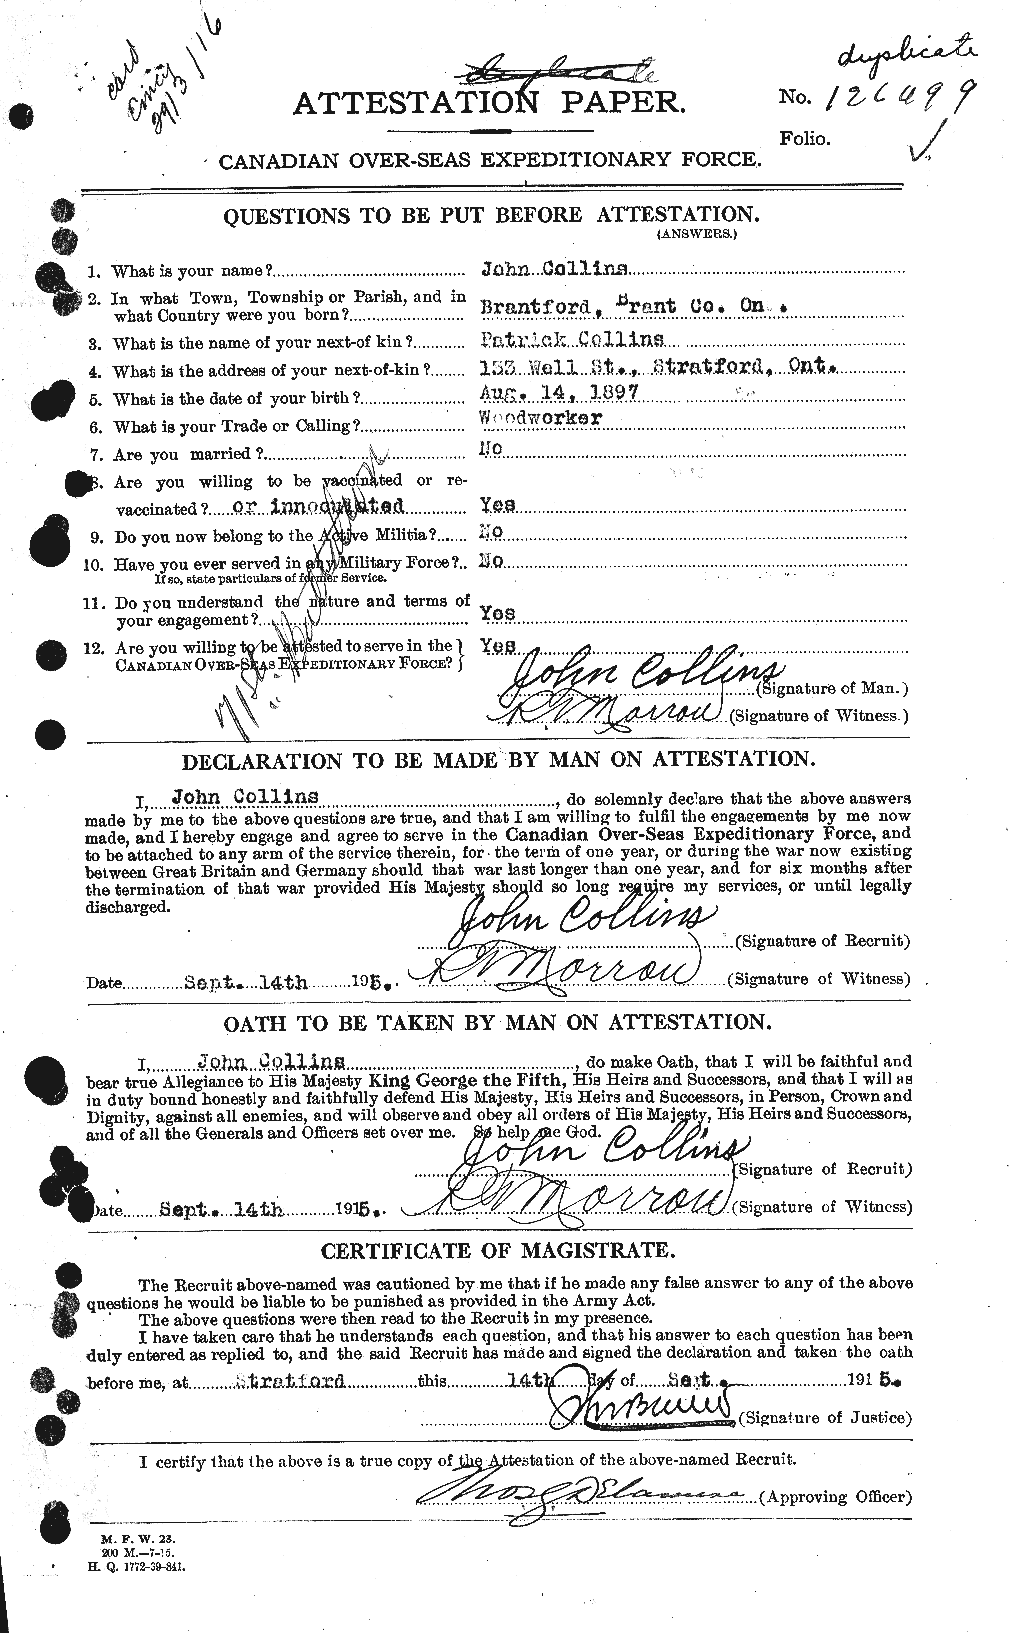 Personnel Records of the First World War - CEF 069813a